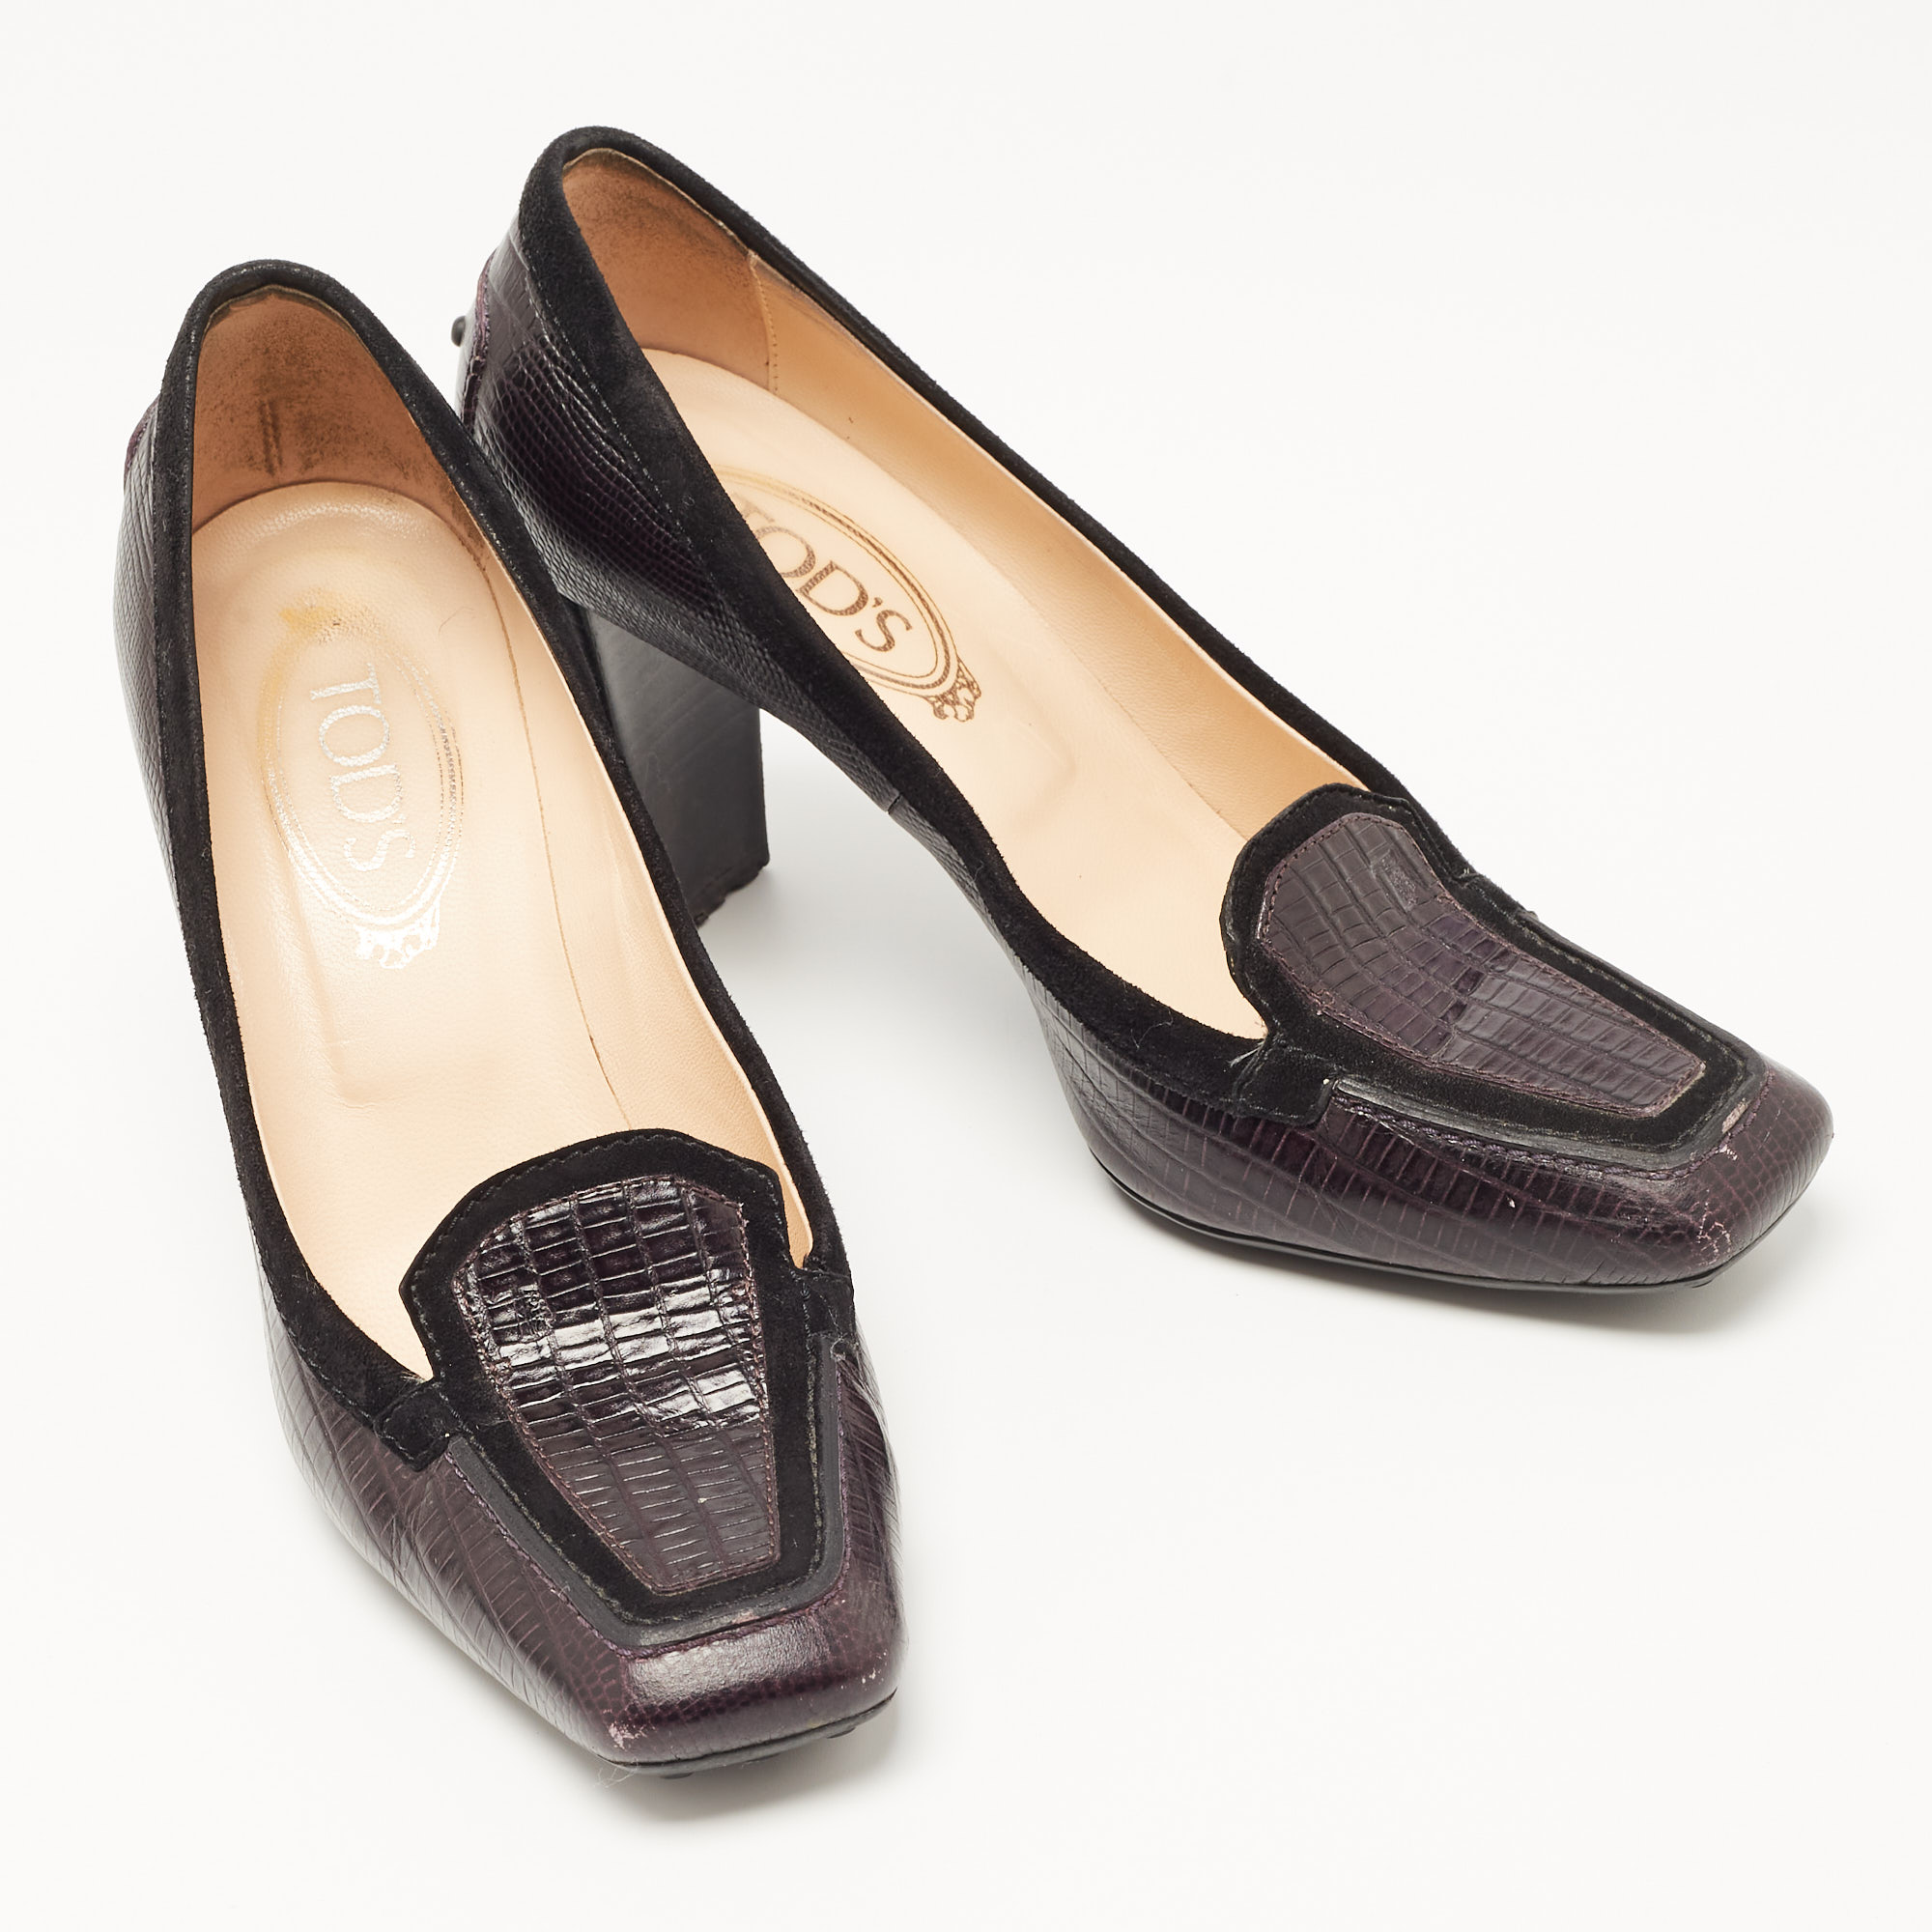 Tod's Dark Purple Lizard Embossed Leather Loafer Pumps Size 38